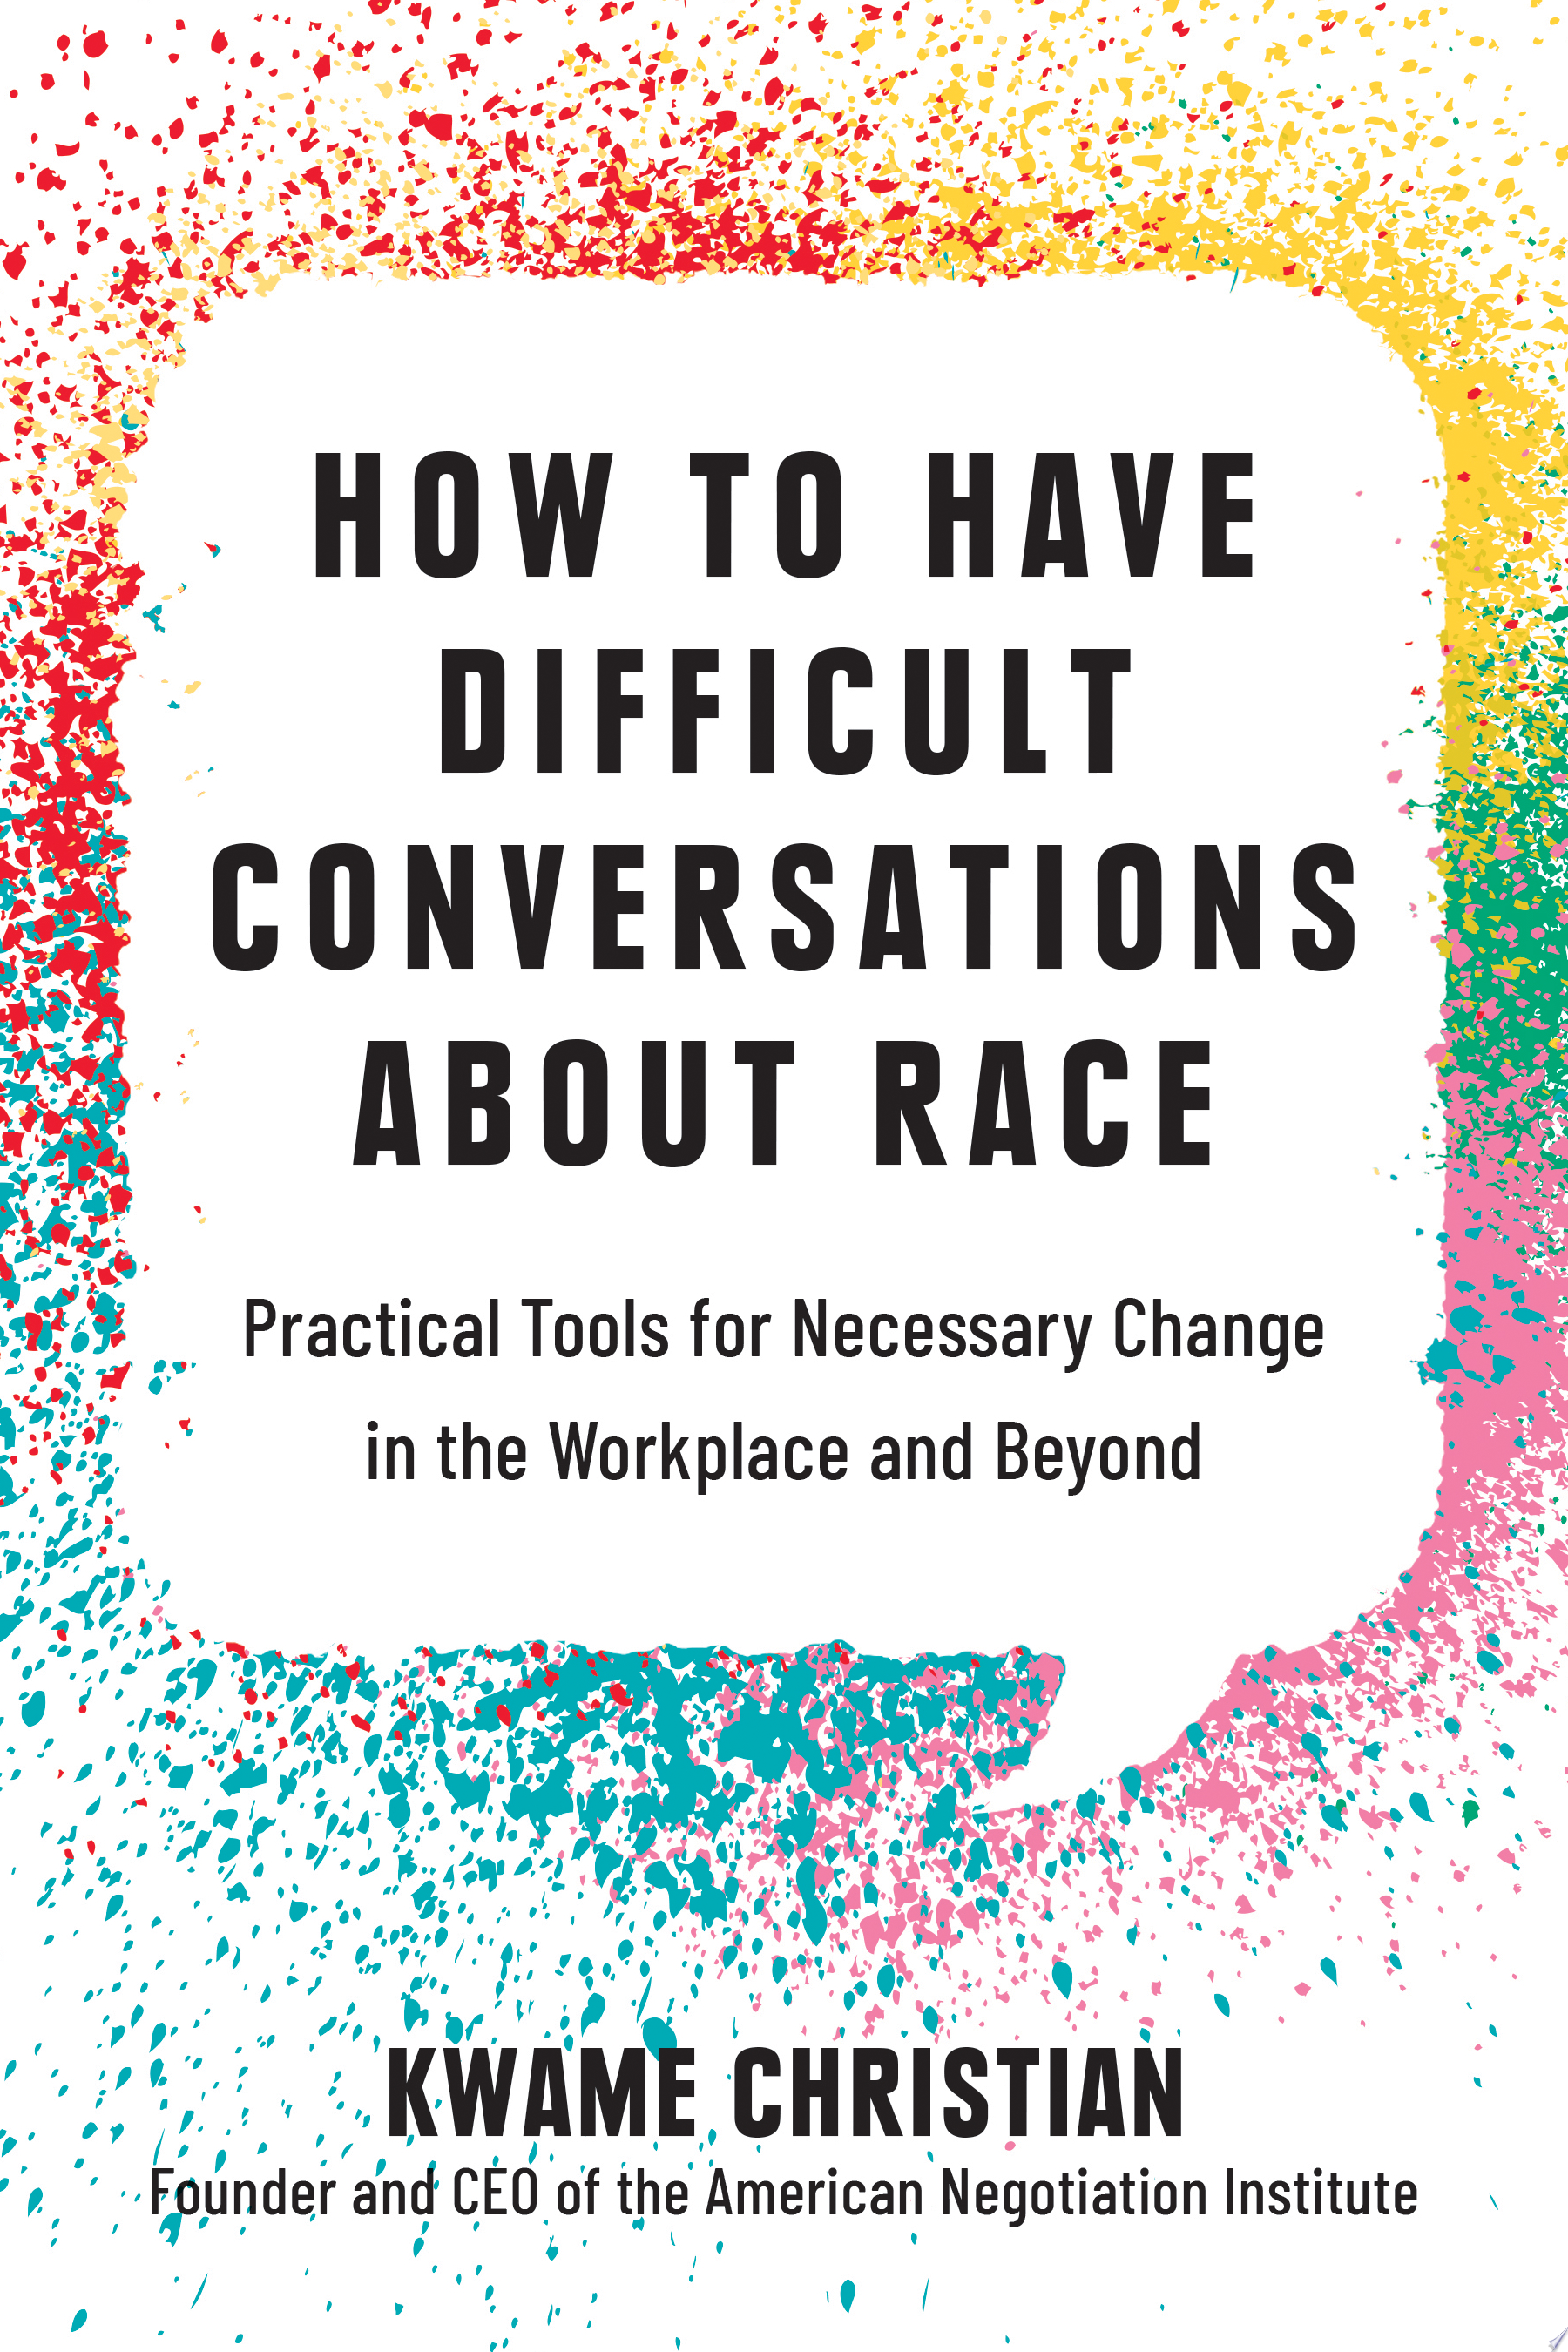 Image for "How to Have Difficult Conversations About Race"